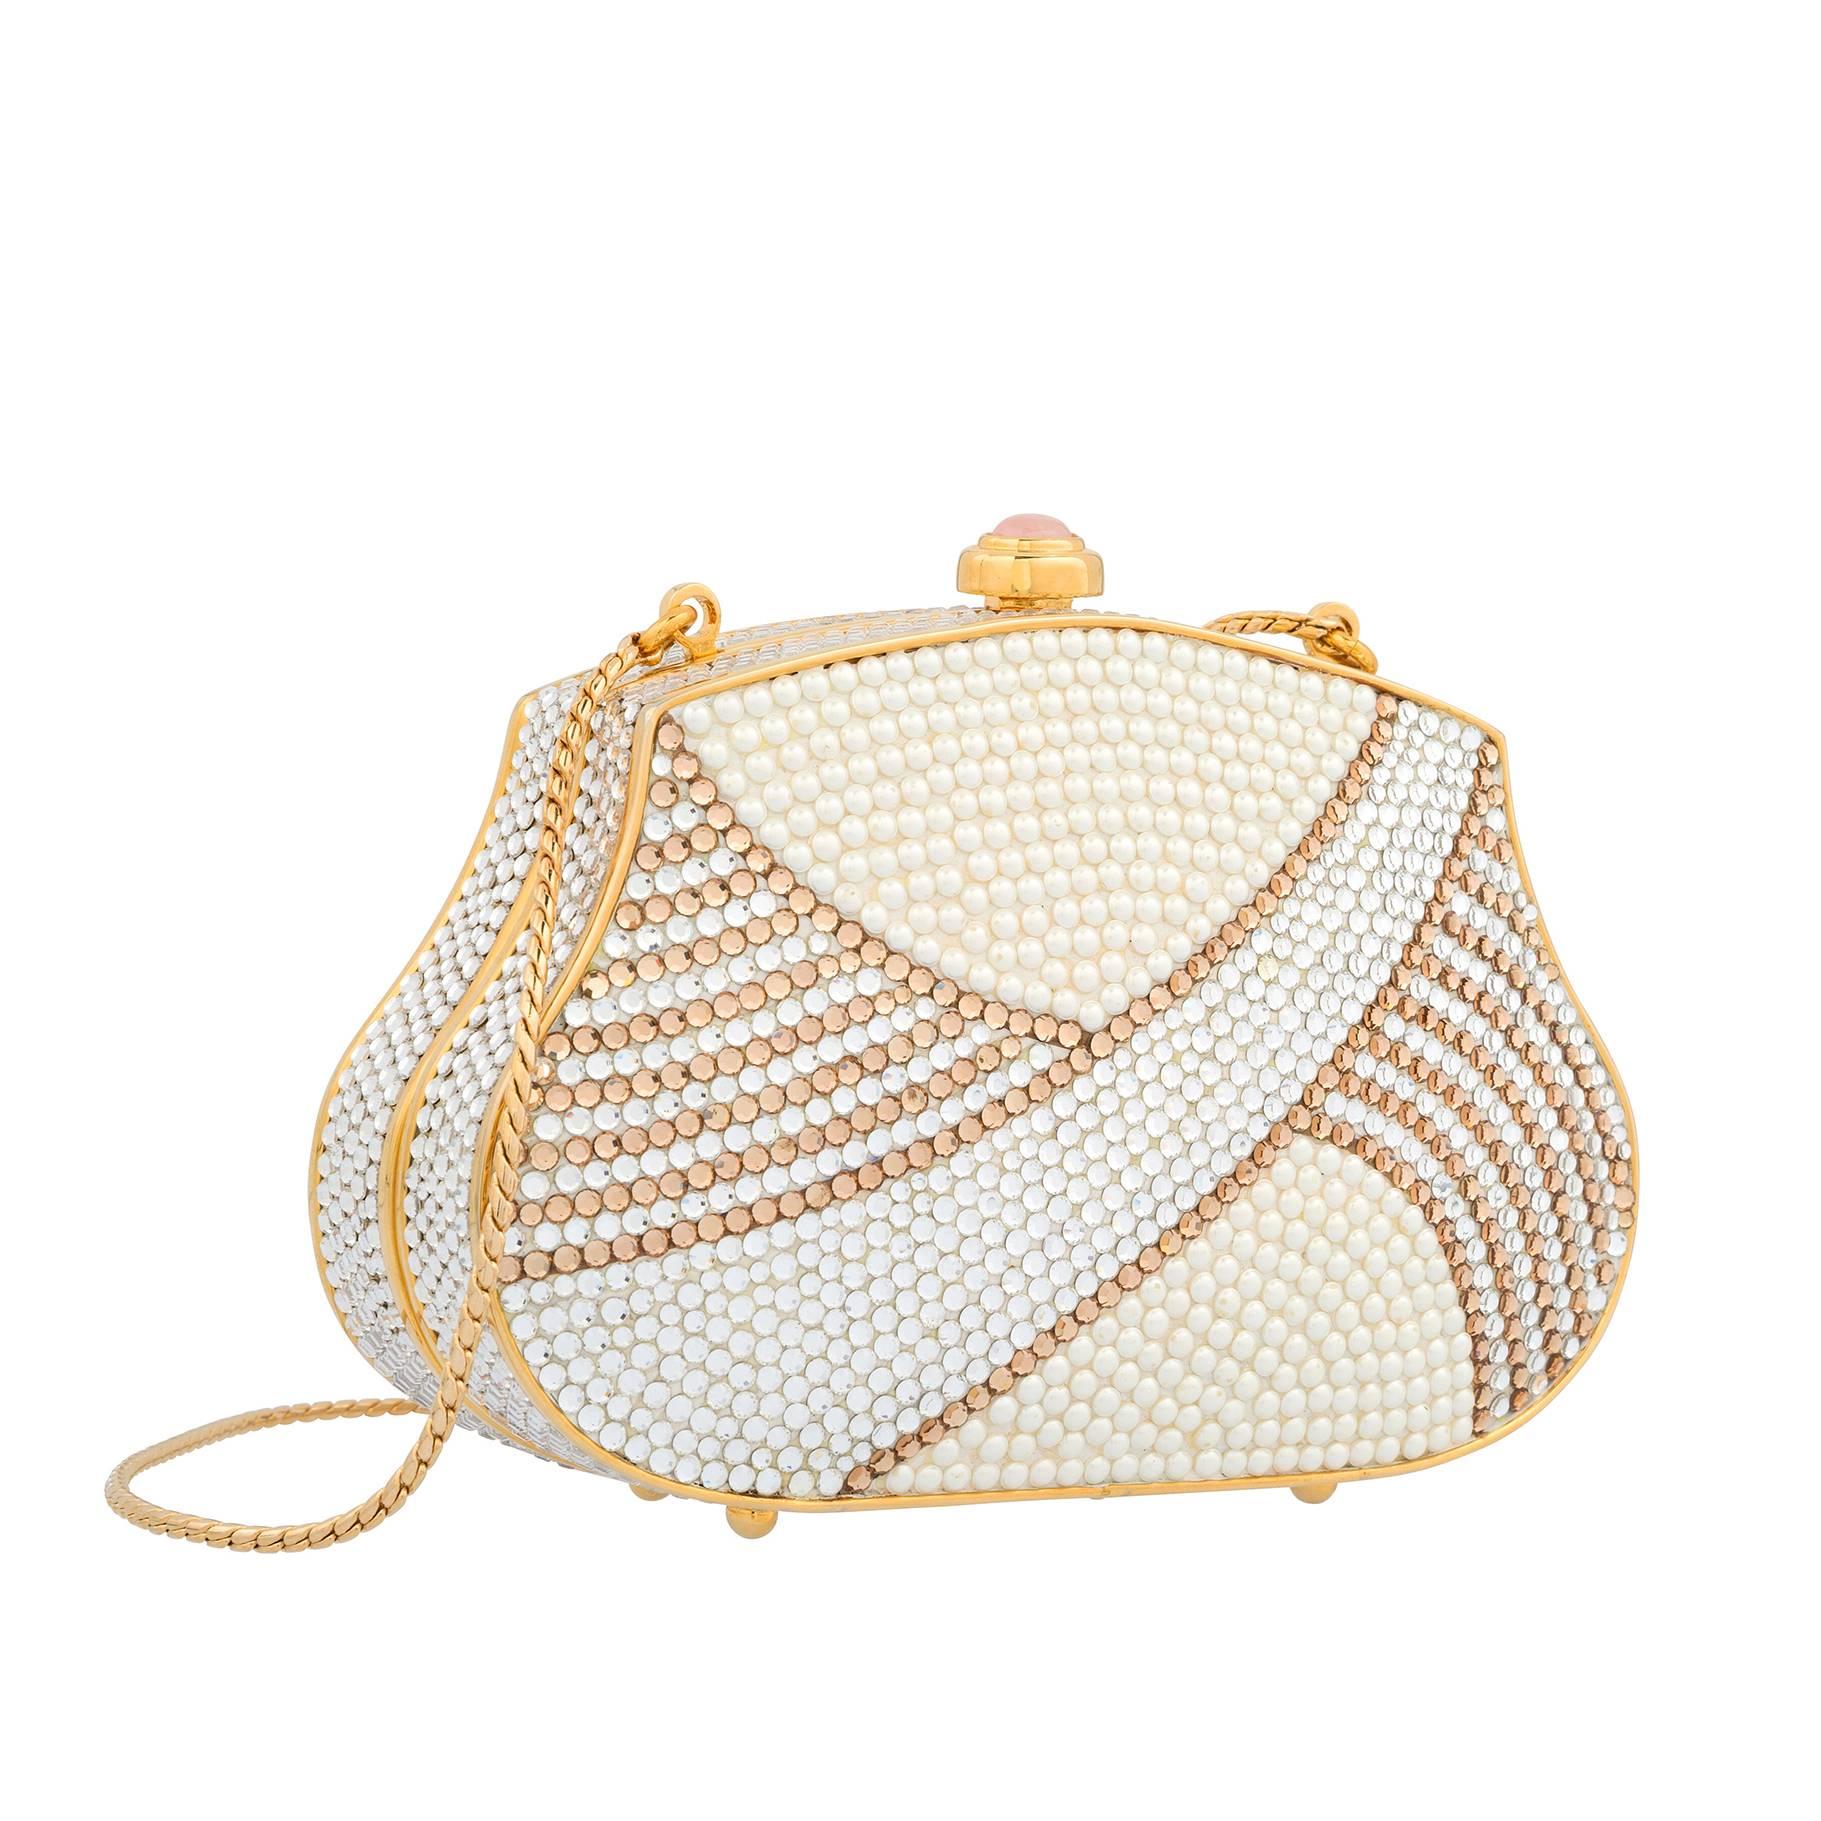 Judith Leiber Full Bead White & Gold Crystal Striped Minaudiere Bag For Sale